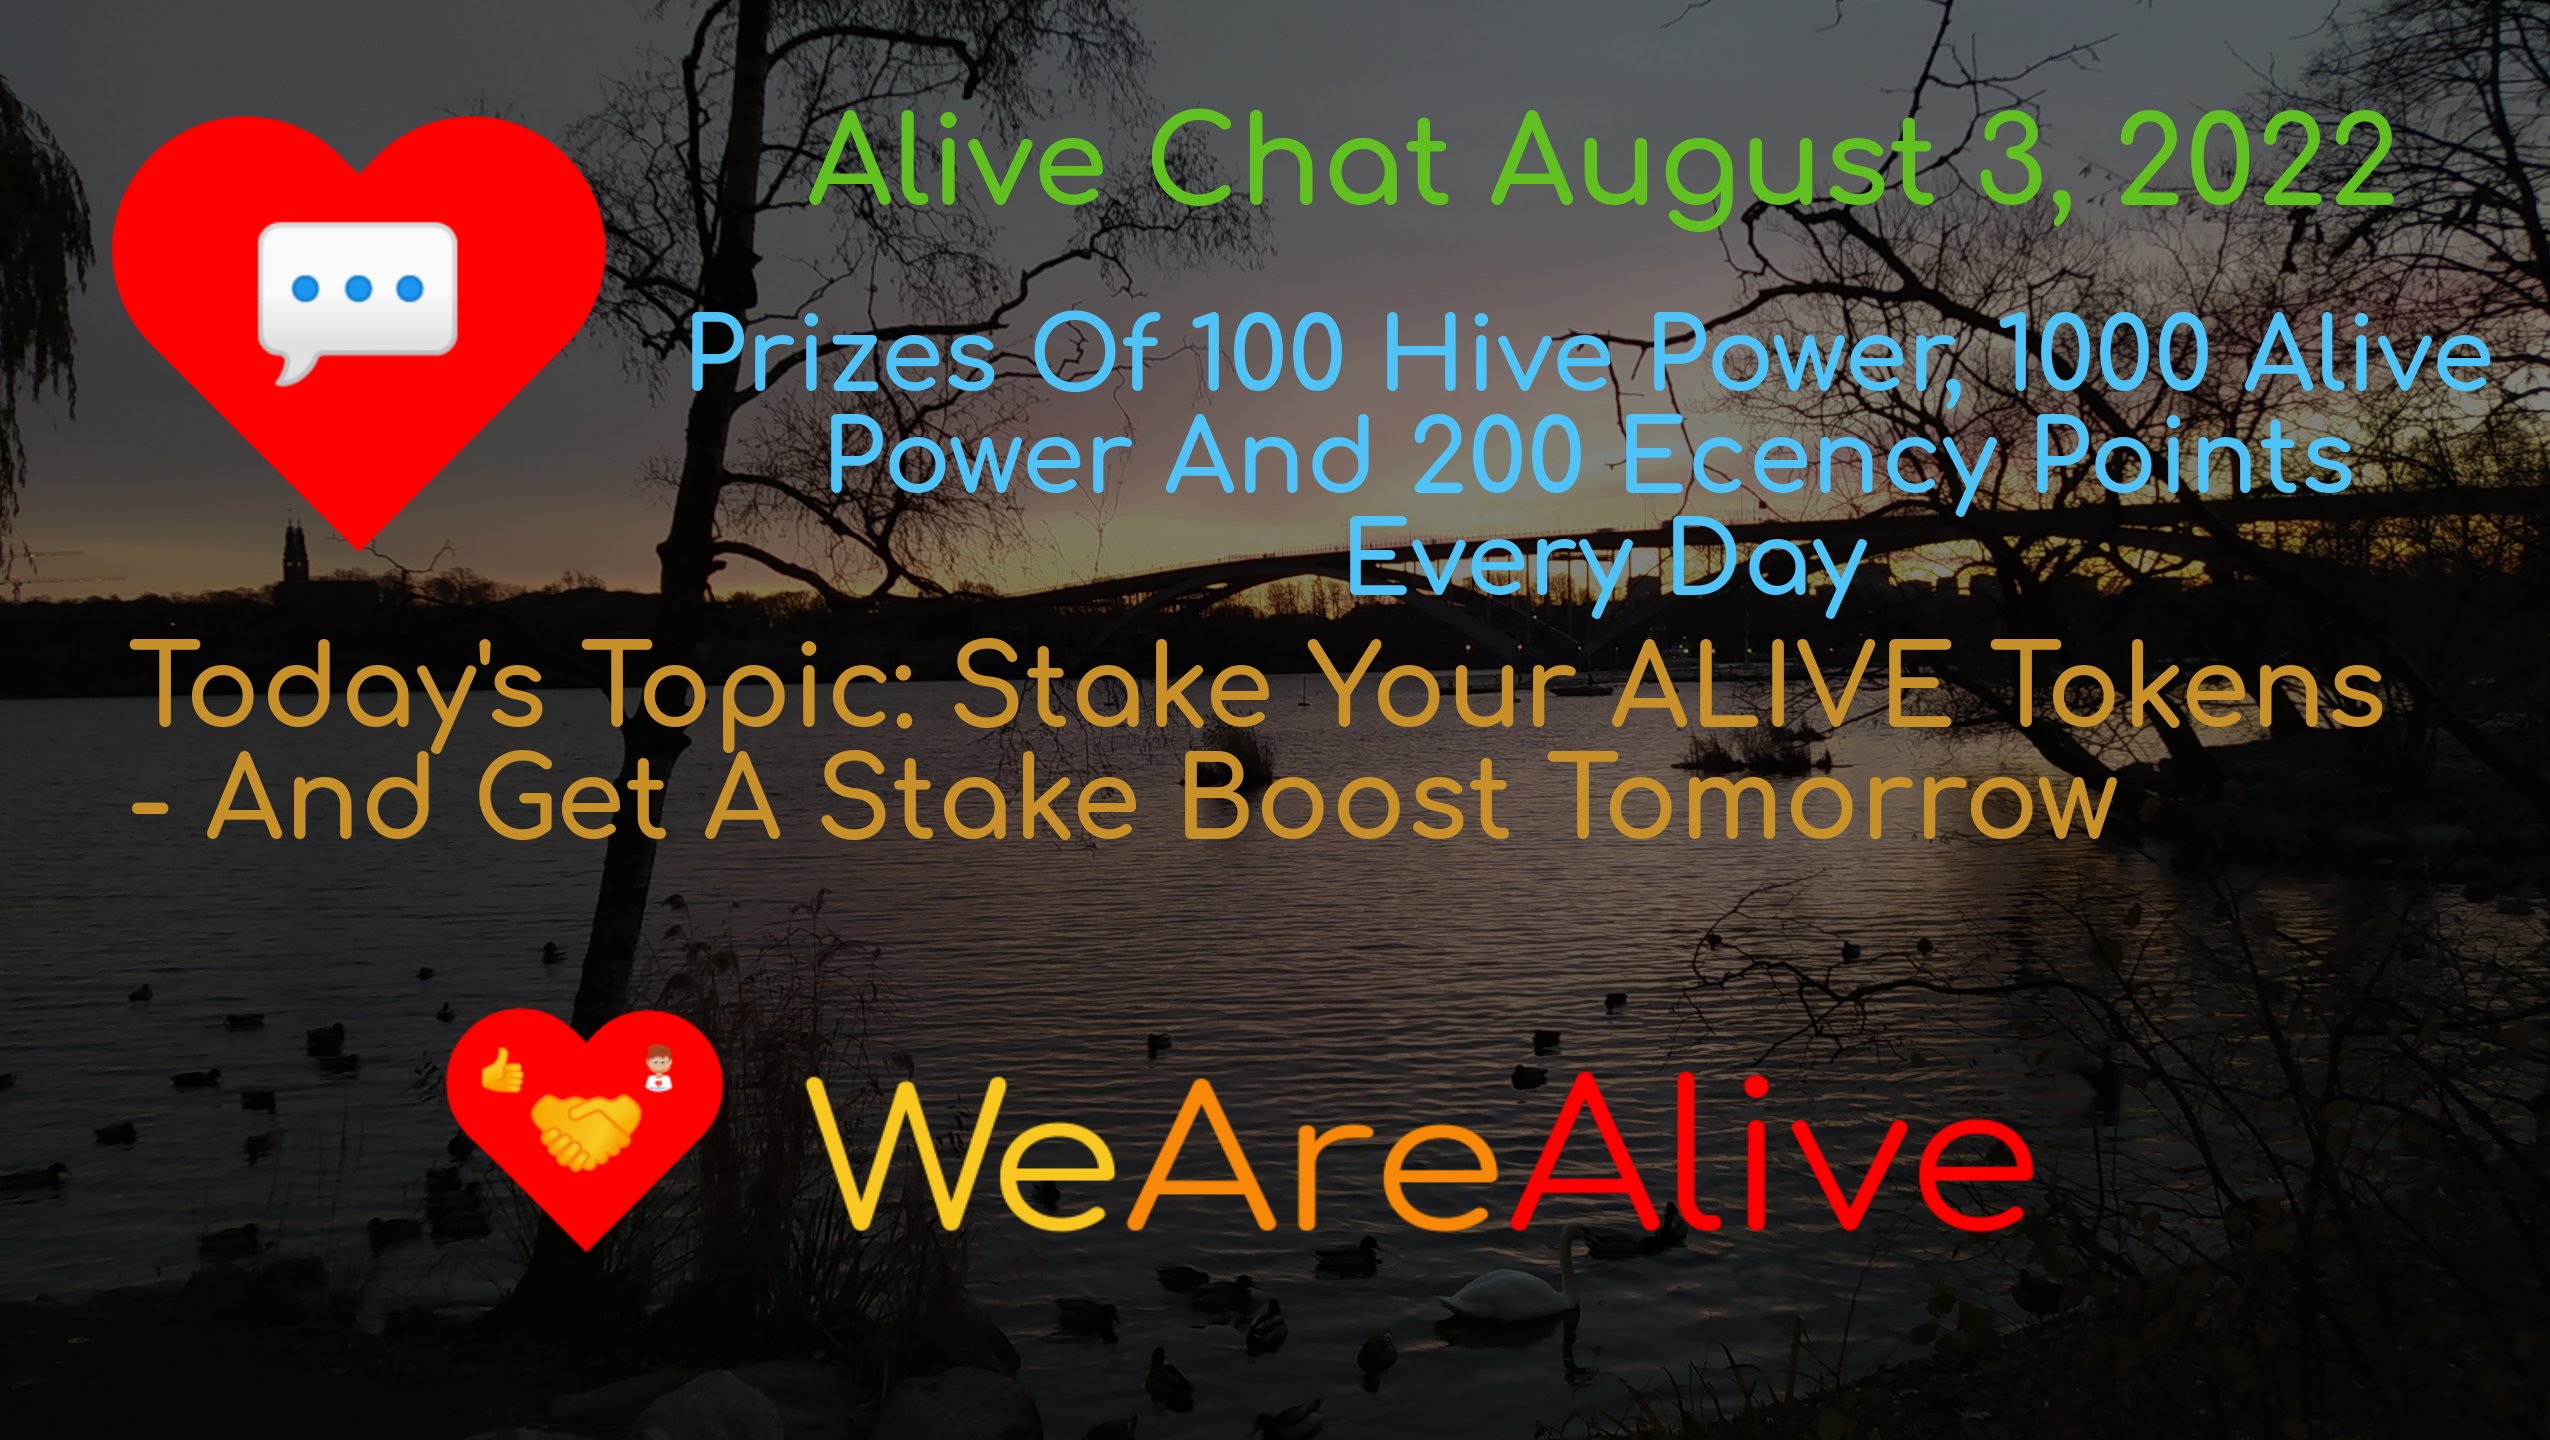 @alive.chat/alive-chat-august-3-2022-daily-prize-drawing-open-for-entries-todays-topic-stake-your-alive-tokens-and-get-a-stake-boost-tomor